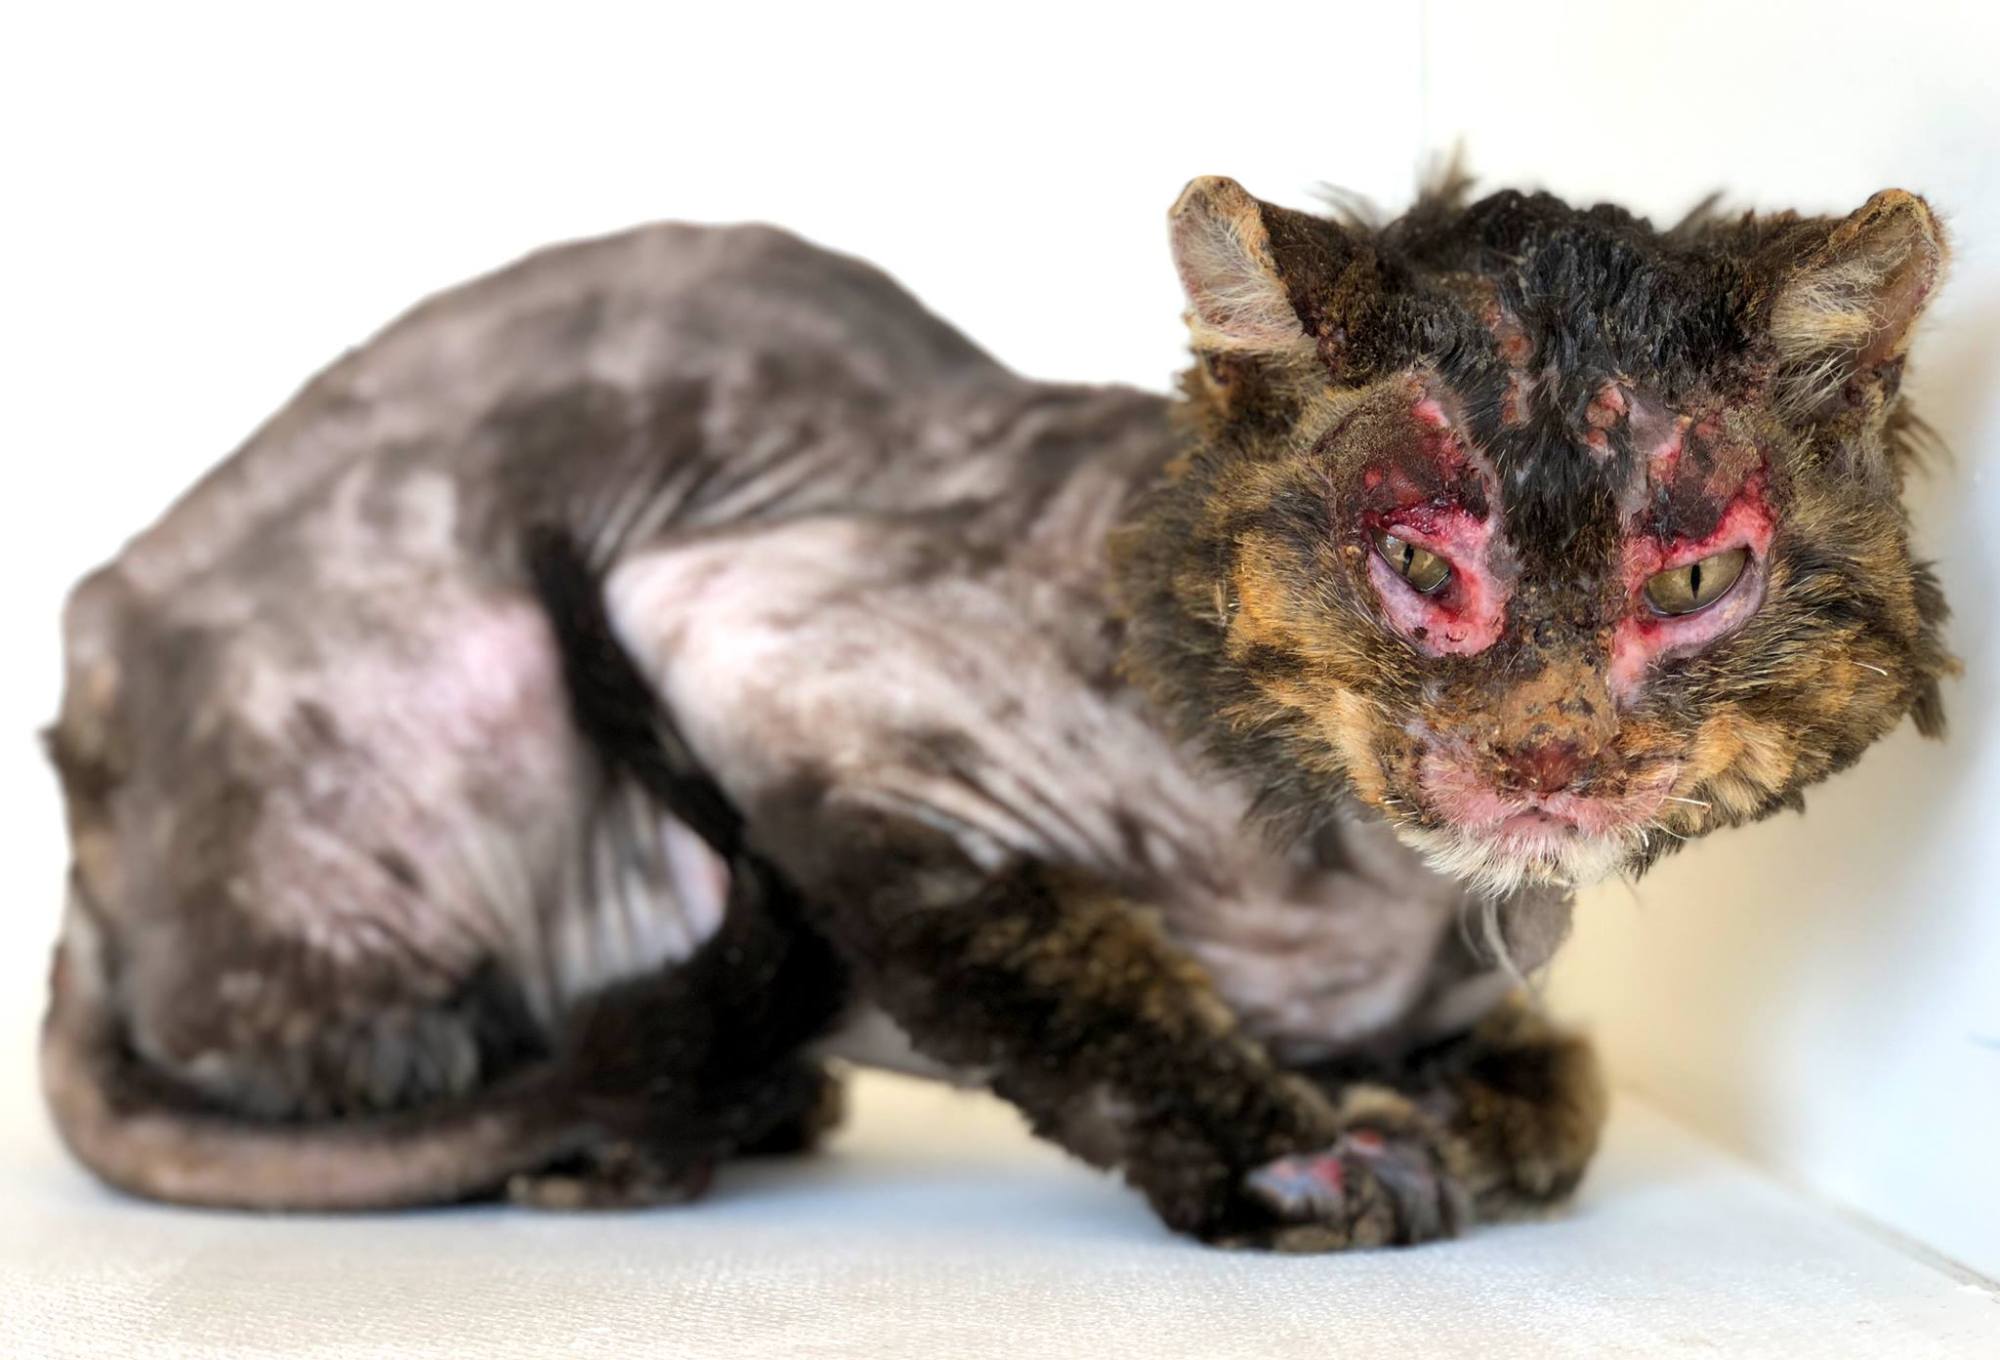 Cat badly burned in Sanpete County on the mend | fox13now.com